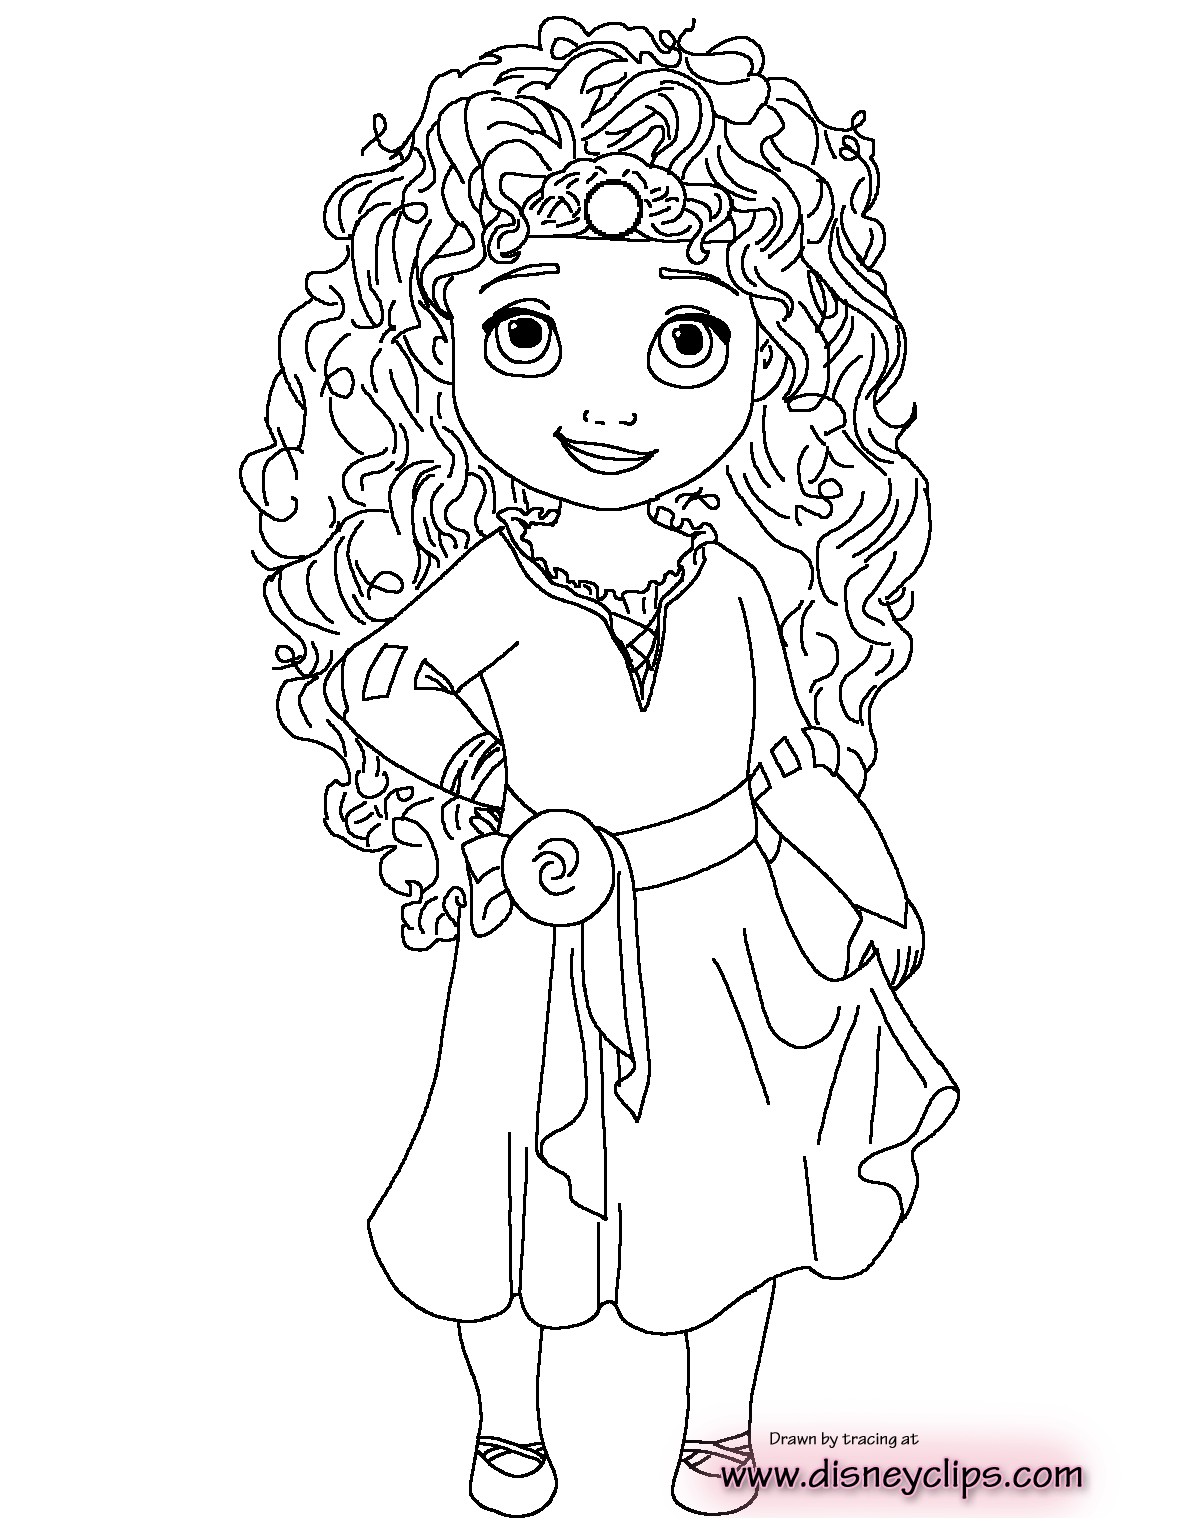 Baby Disney Princess Coloring Pages 82 with Baby Disney Princess Coloring Pages